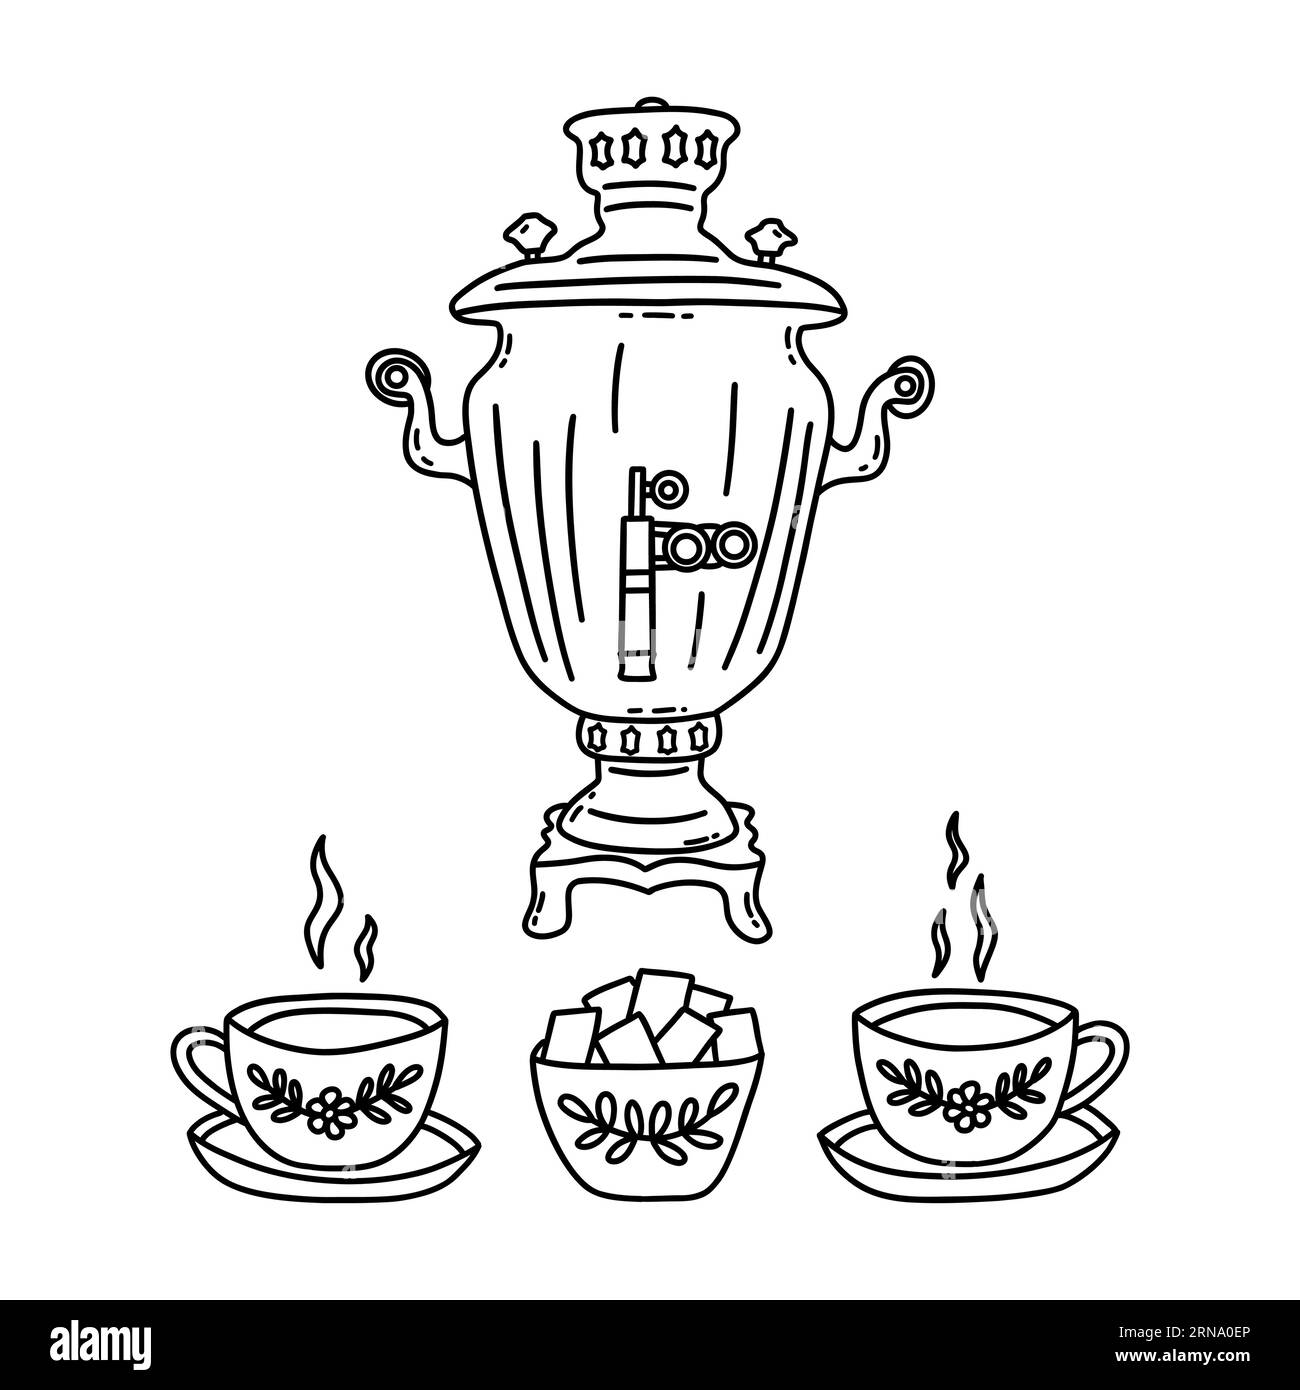 Samovar and two cups of tea with saucers, sugar bowl nearby, vintage crockery. Ancient traditional Russian culture of tea drinking. Black and white ve Stock Vector